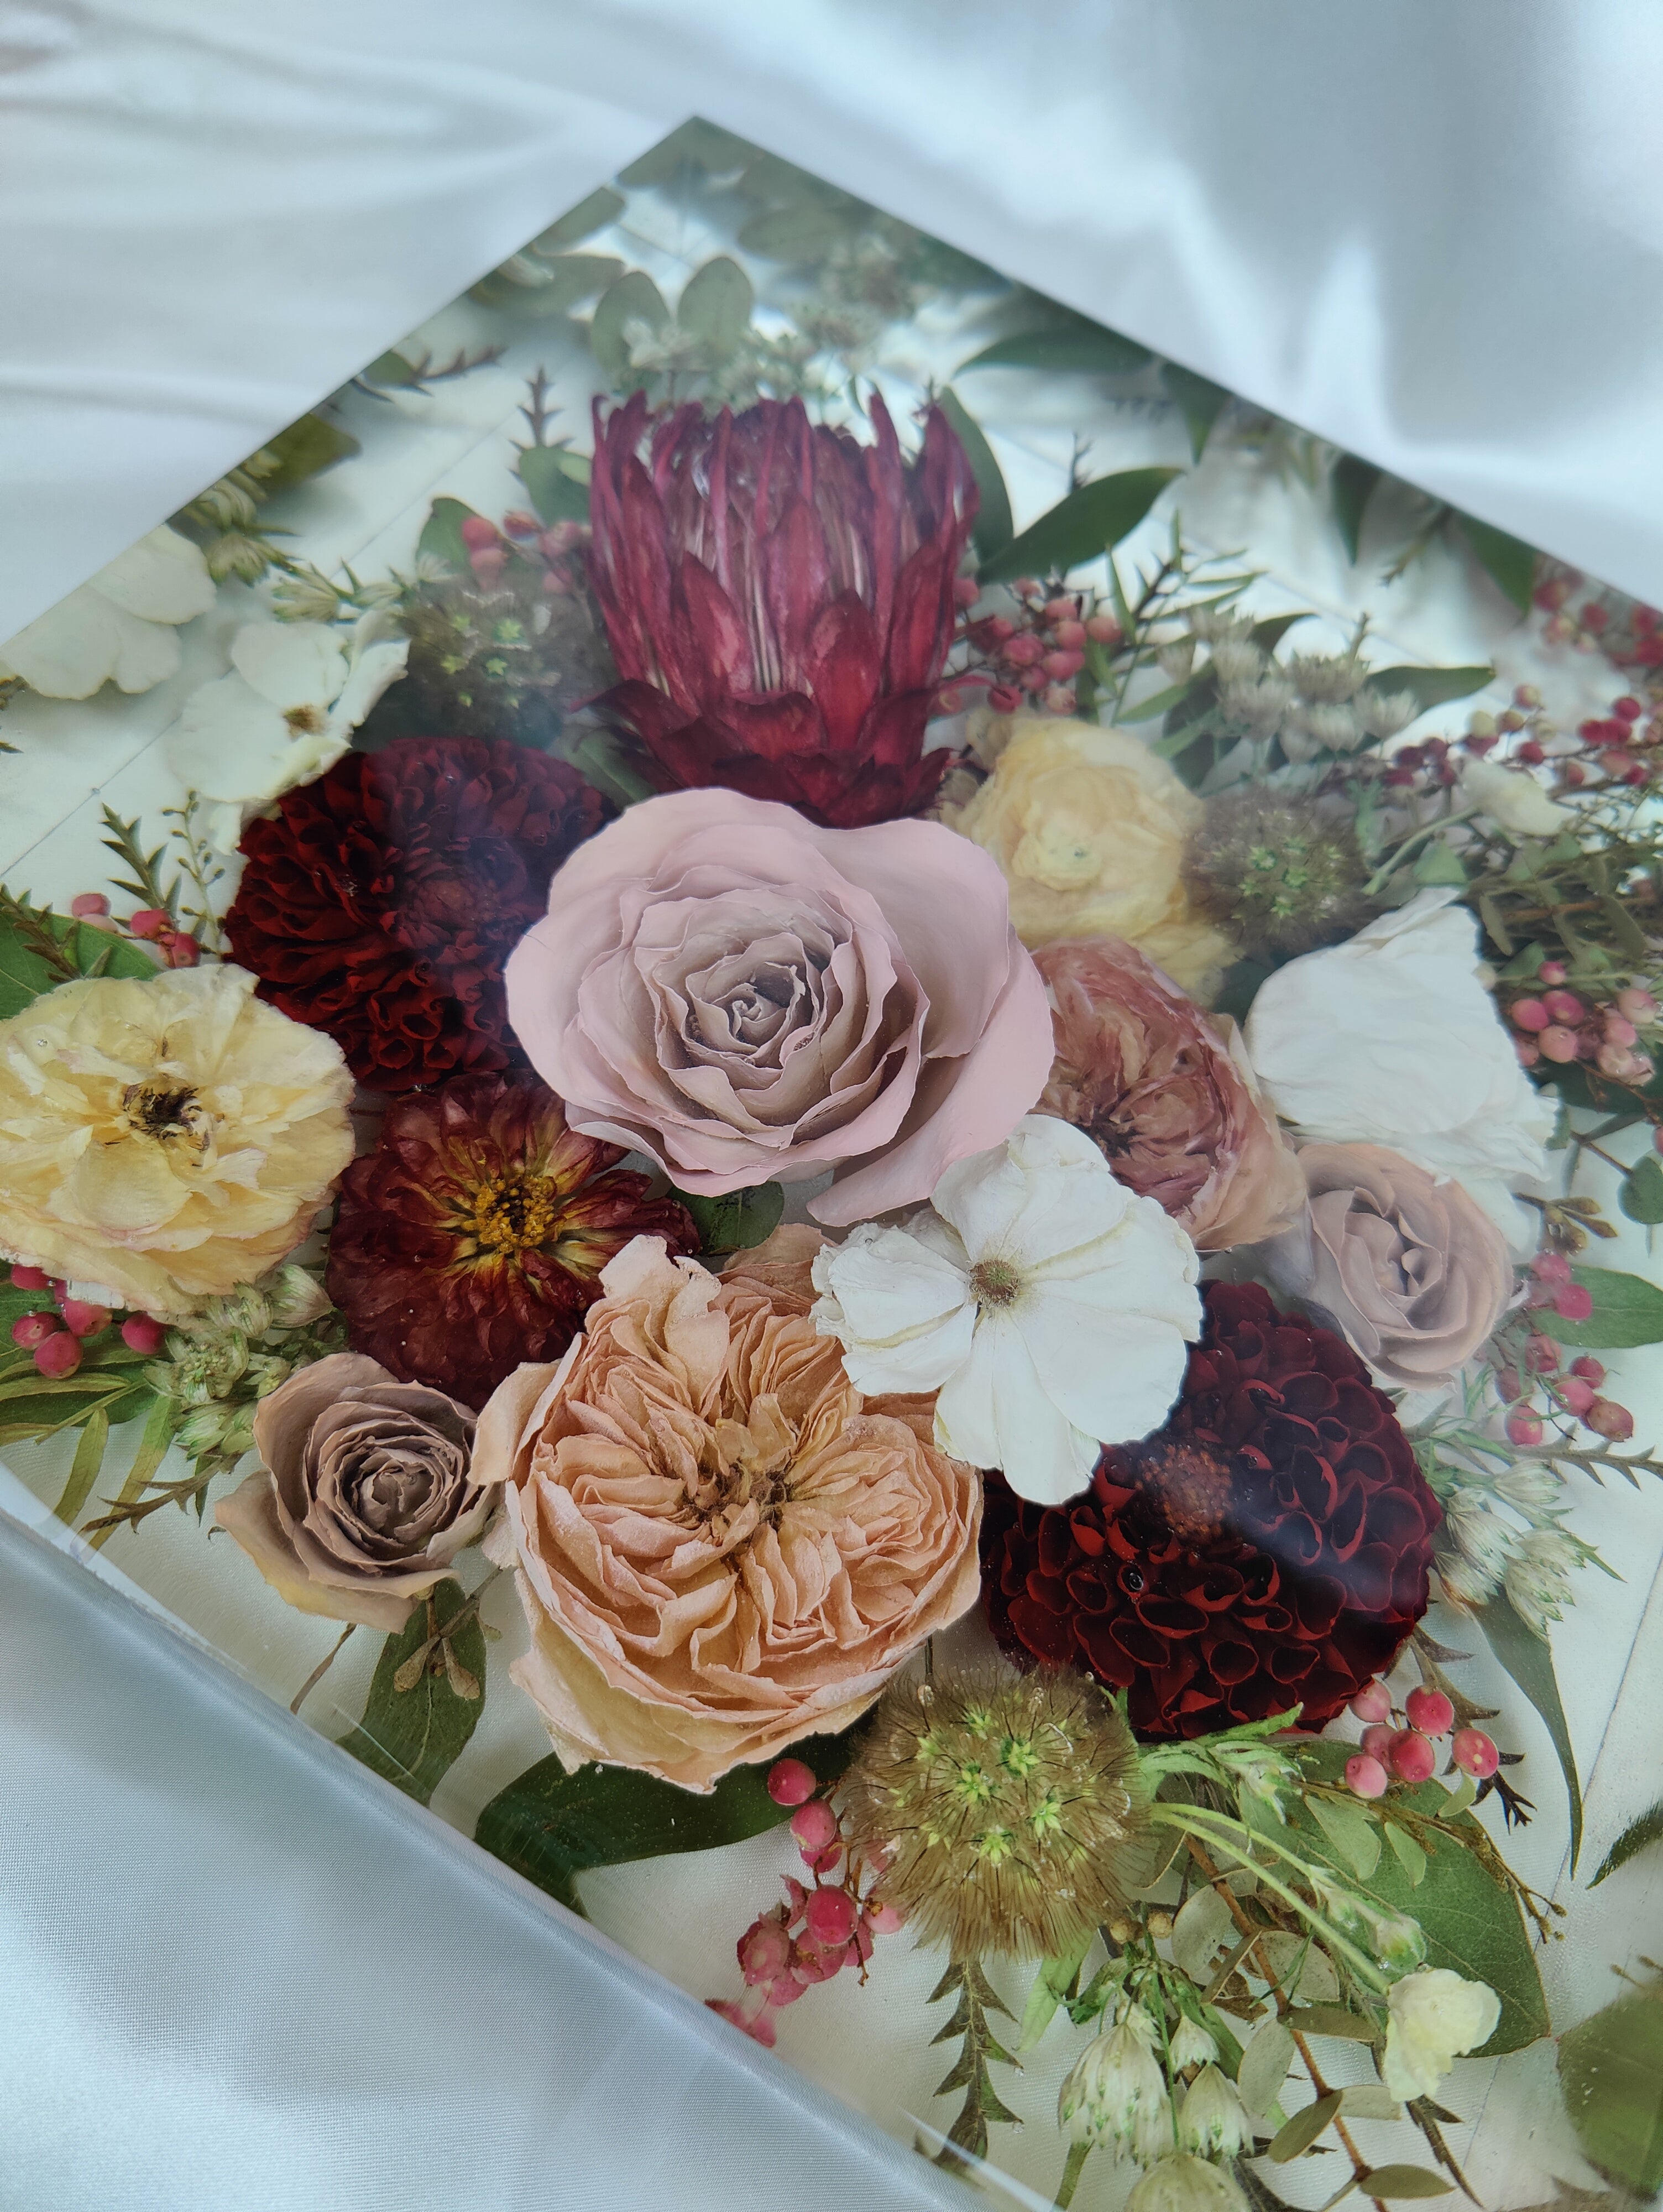 Dried Flower Resin Block / Hexagon — Glasshouse Collection